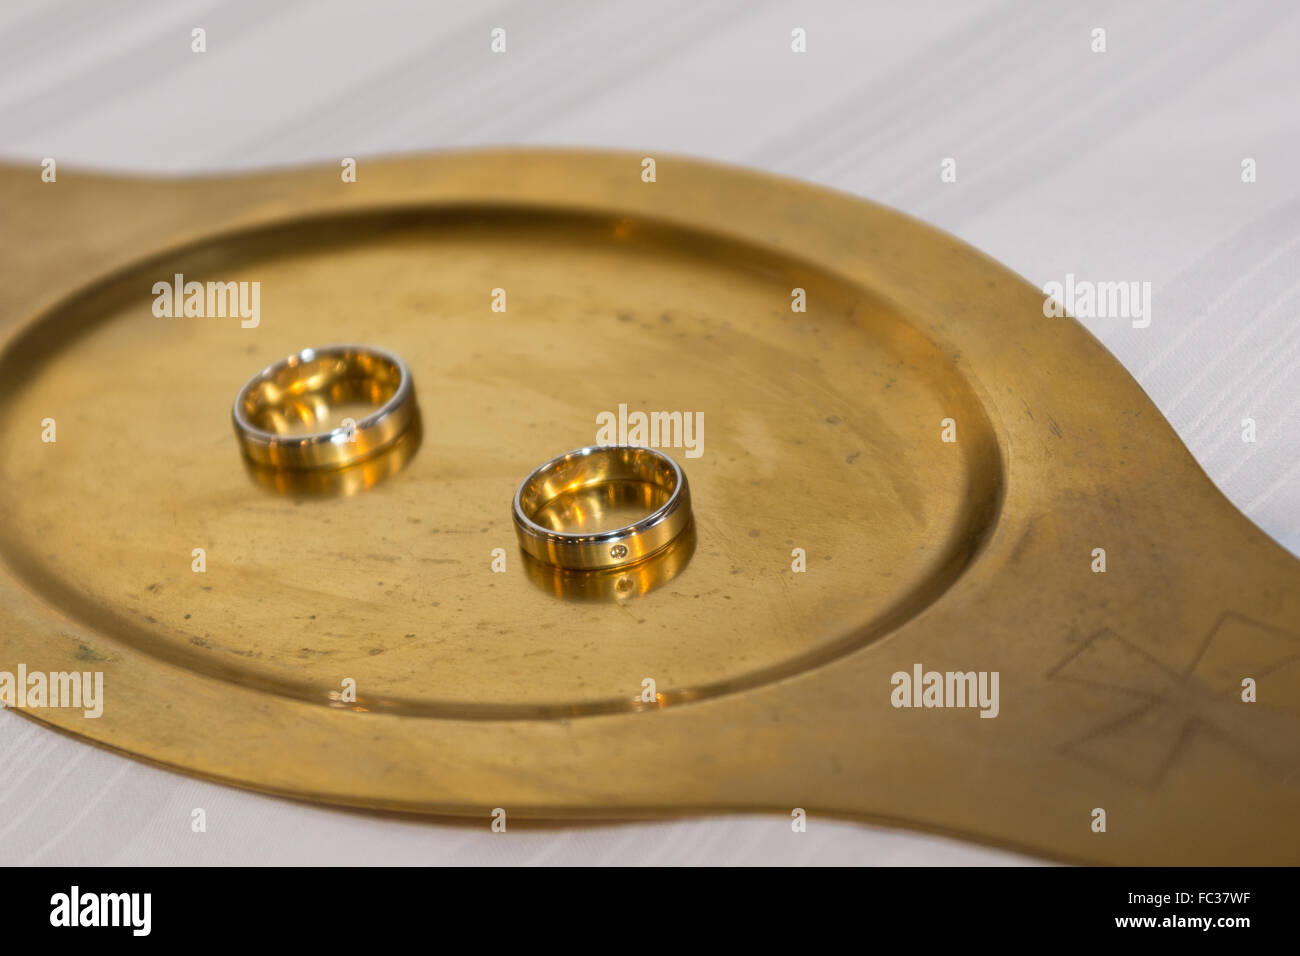 Two gold wedding rings on a gold tablet Stock Photo